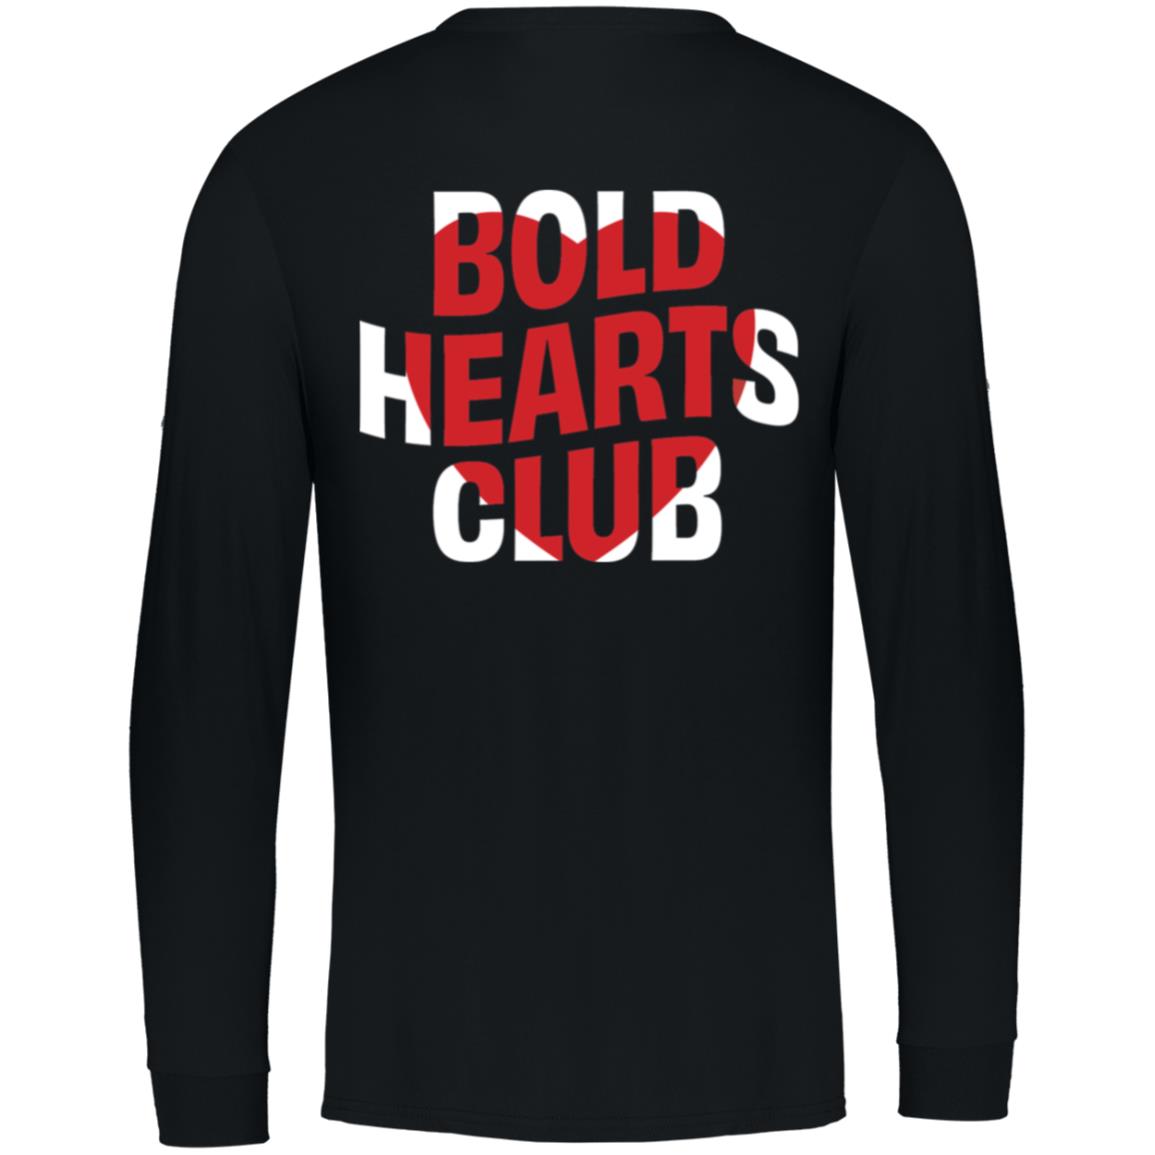 black long sleeve tshirt with a red heart and words "Bold Hearts Club" printed over it.